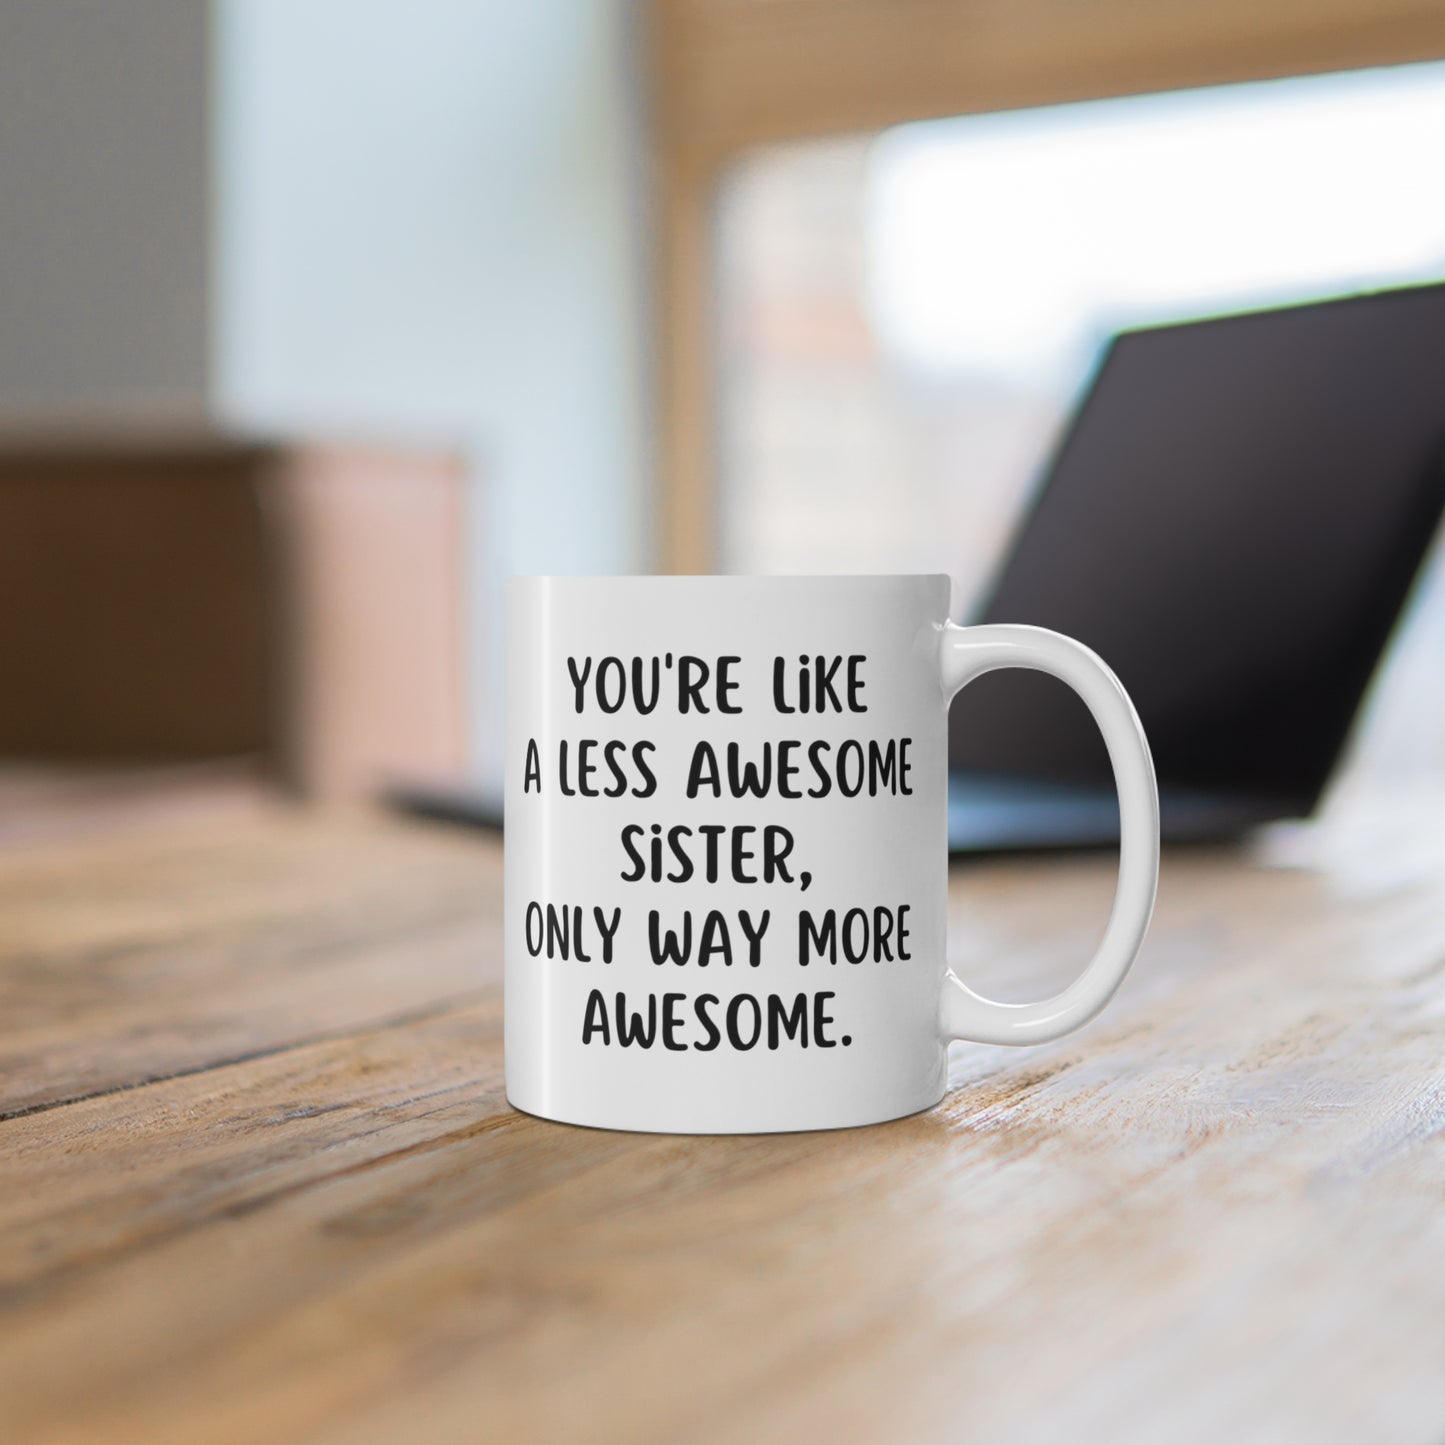 You're Like A Less Awesome Sister, Only Way More Awesome | Funny, Snarky Gift | White Ceramic Mug, Fun Block Font